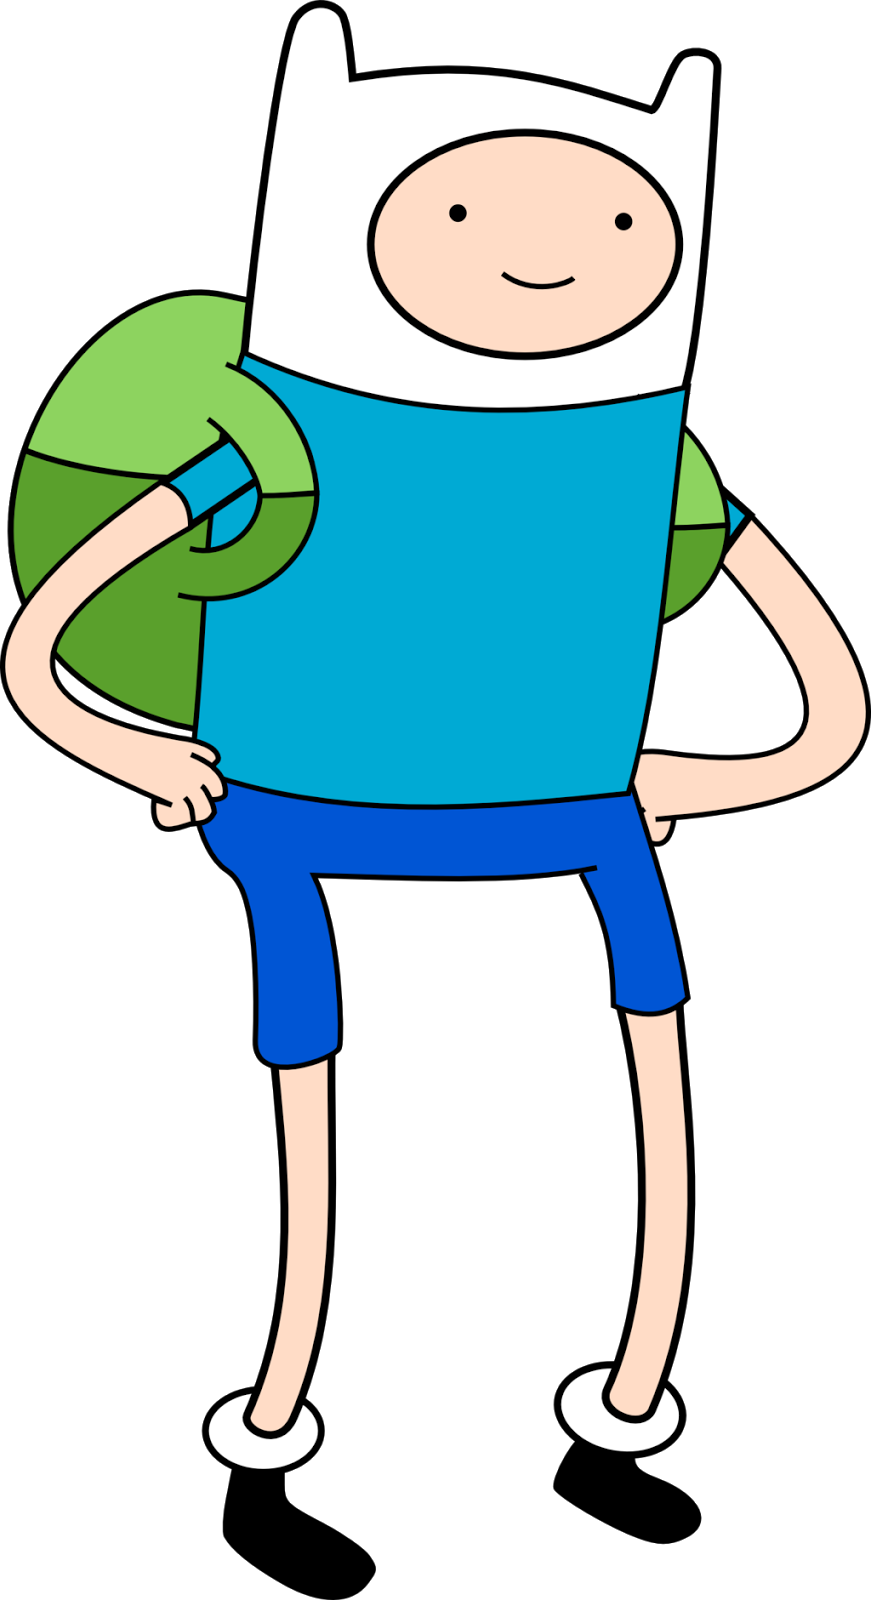 Finn the human Adventure Time Cartoon Characters PNG #44258.